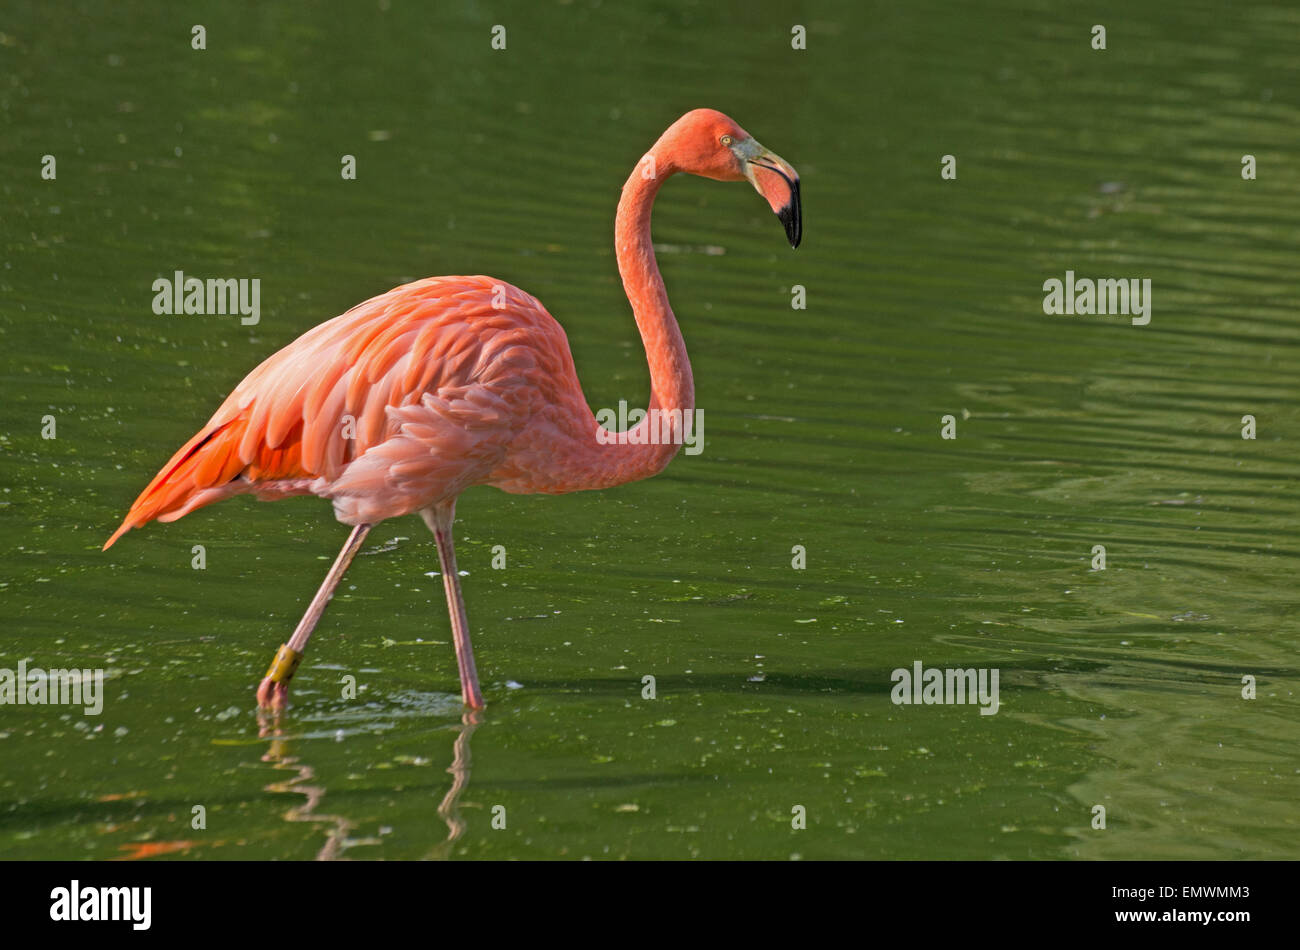 ROSY OU CARAÏBES FLAMINGO, Phoenicopterus ruber ruber, Caraïbes, Banque D'Images